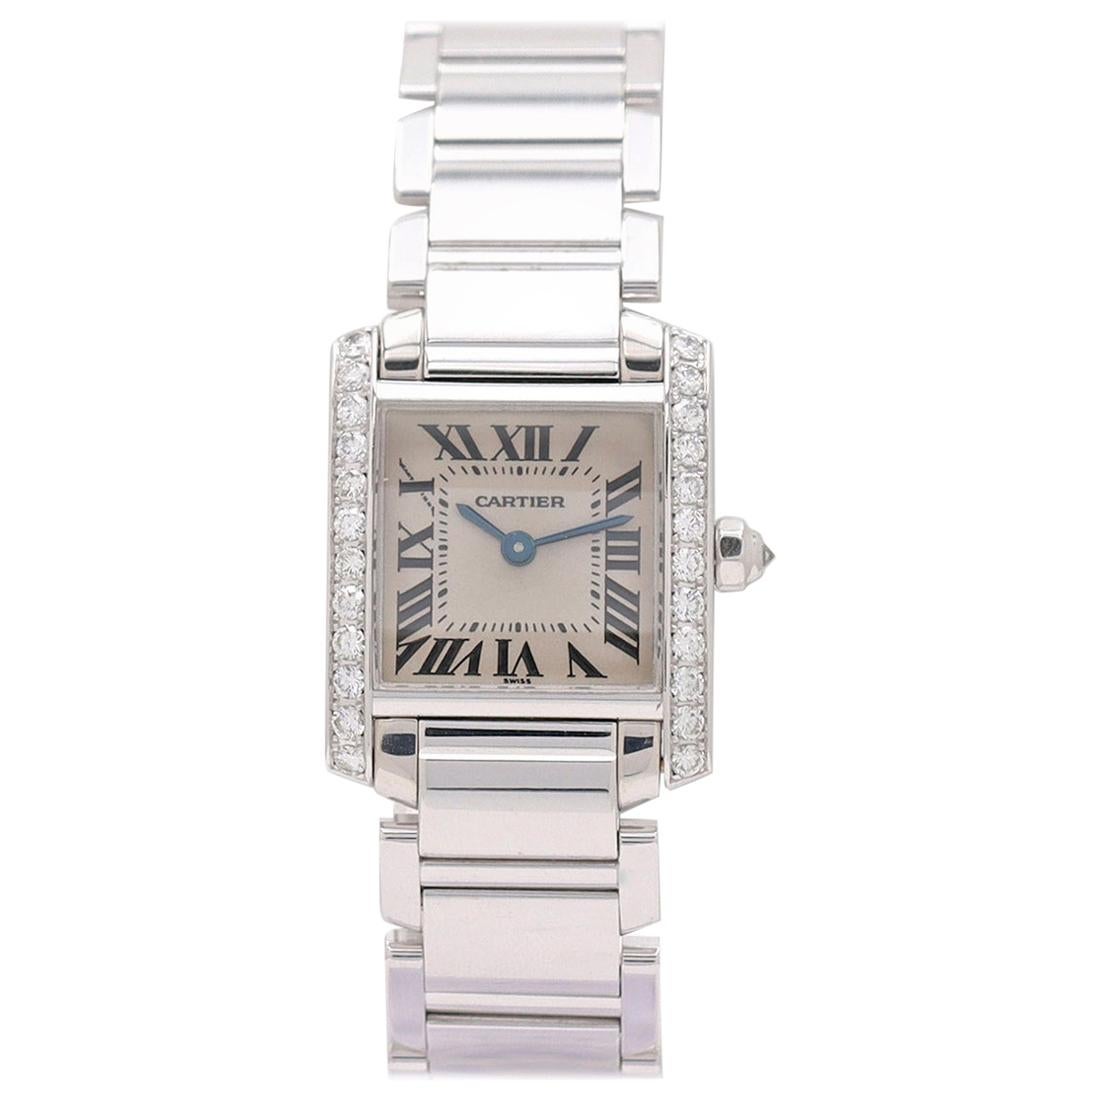 Cartier 'Tank Française' White Gold and Diamond Ladies Watch